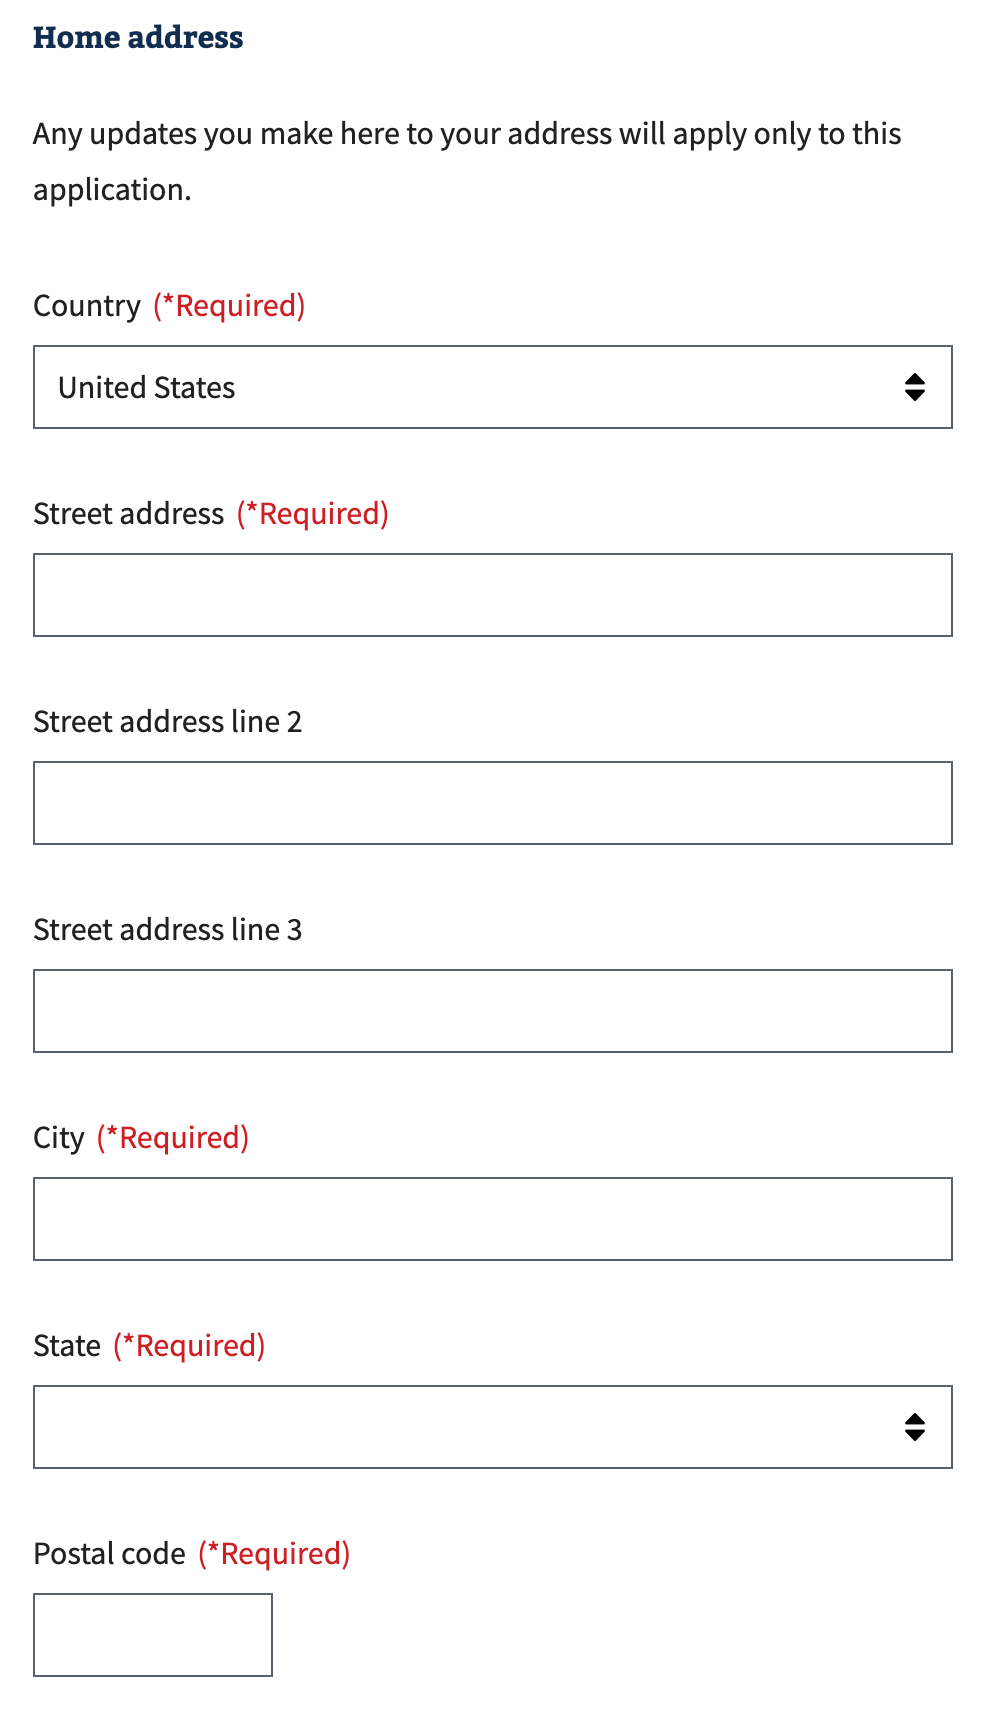 An example of a home address form.